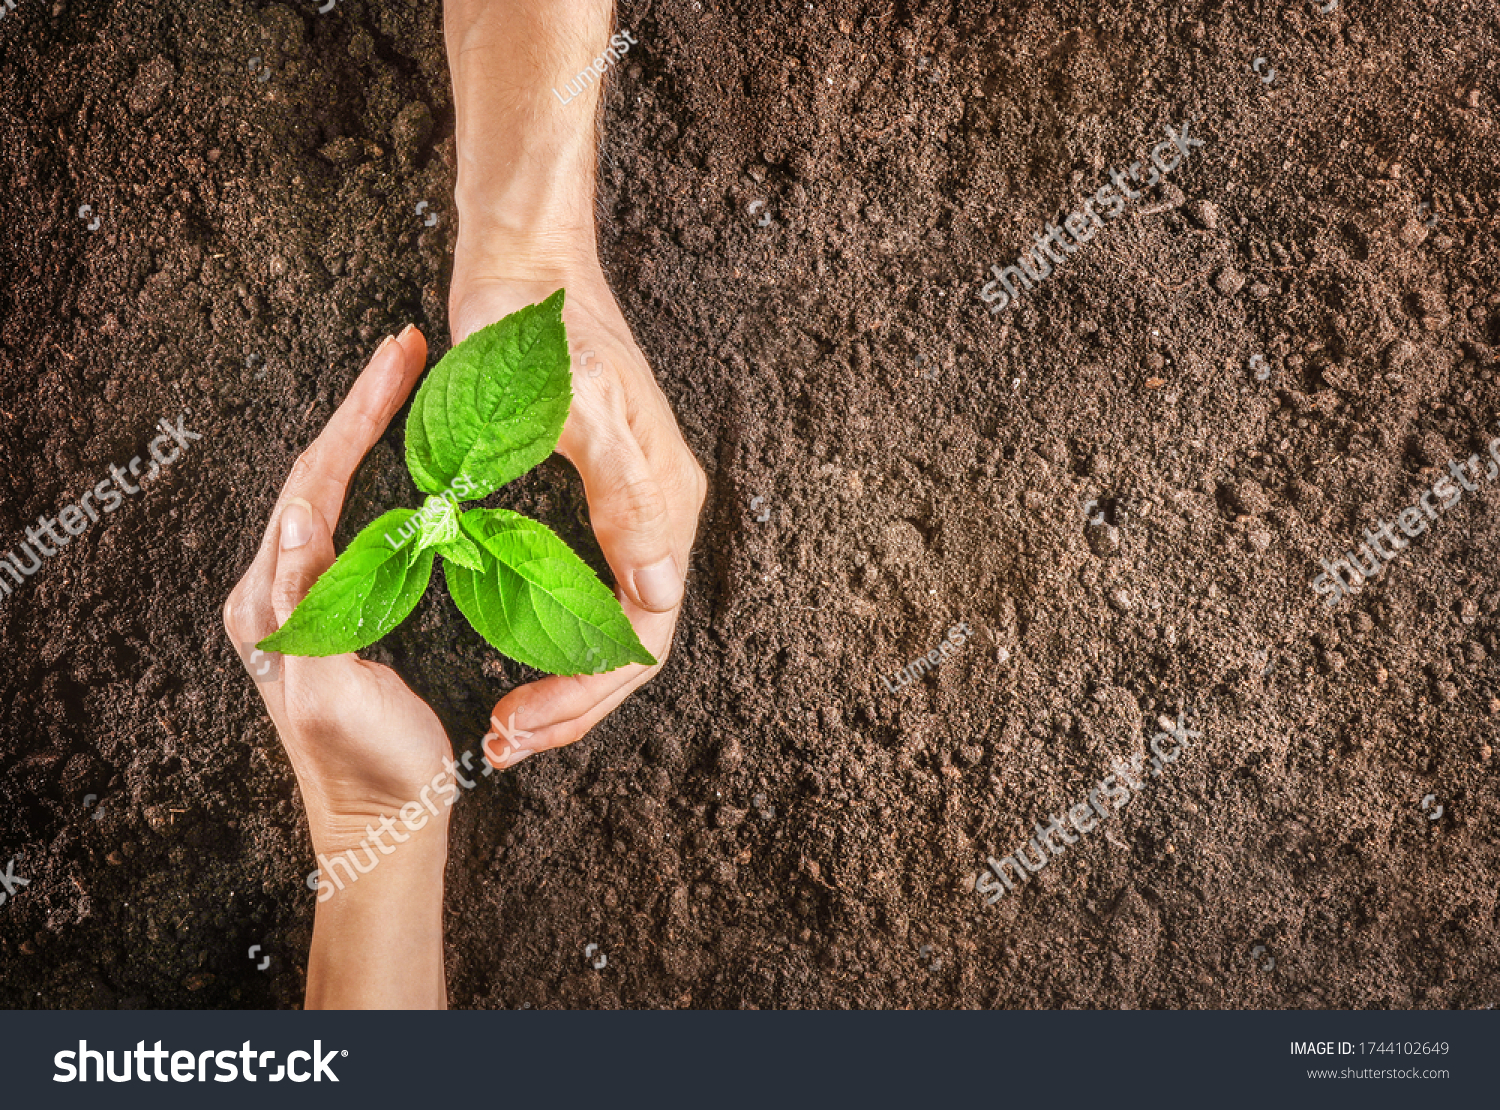 Hands holding sapling in soil. Top view.  #1744102649